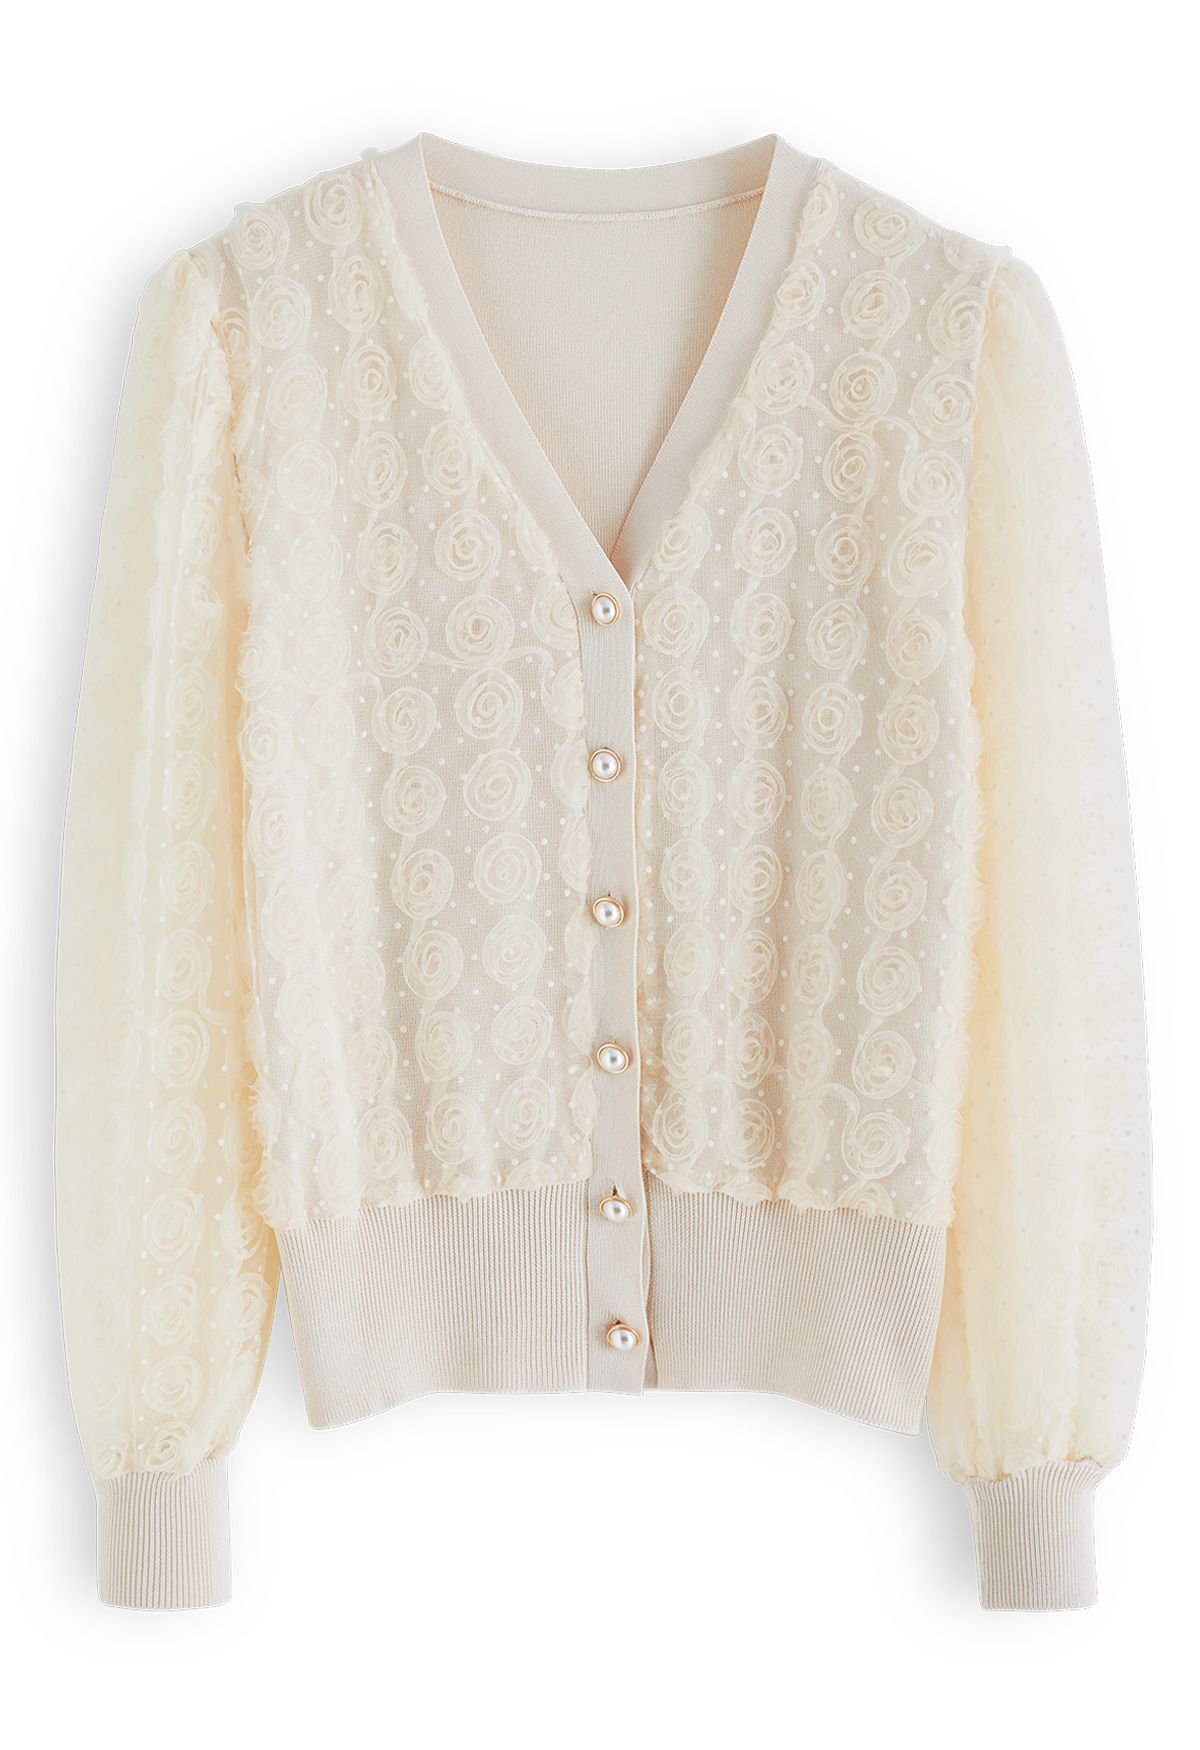 3D Rose Button Down Mesh Knit Top in Cream